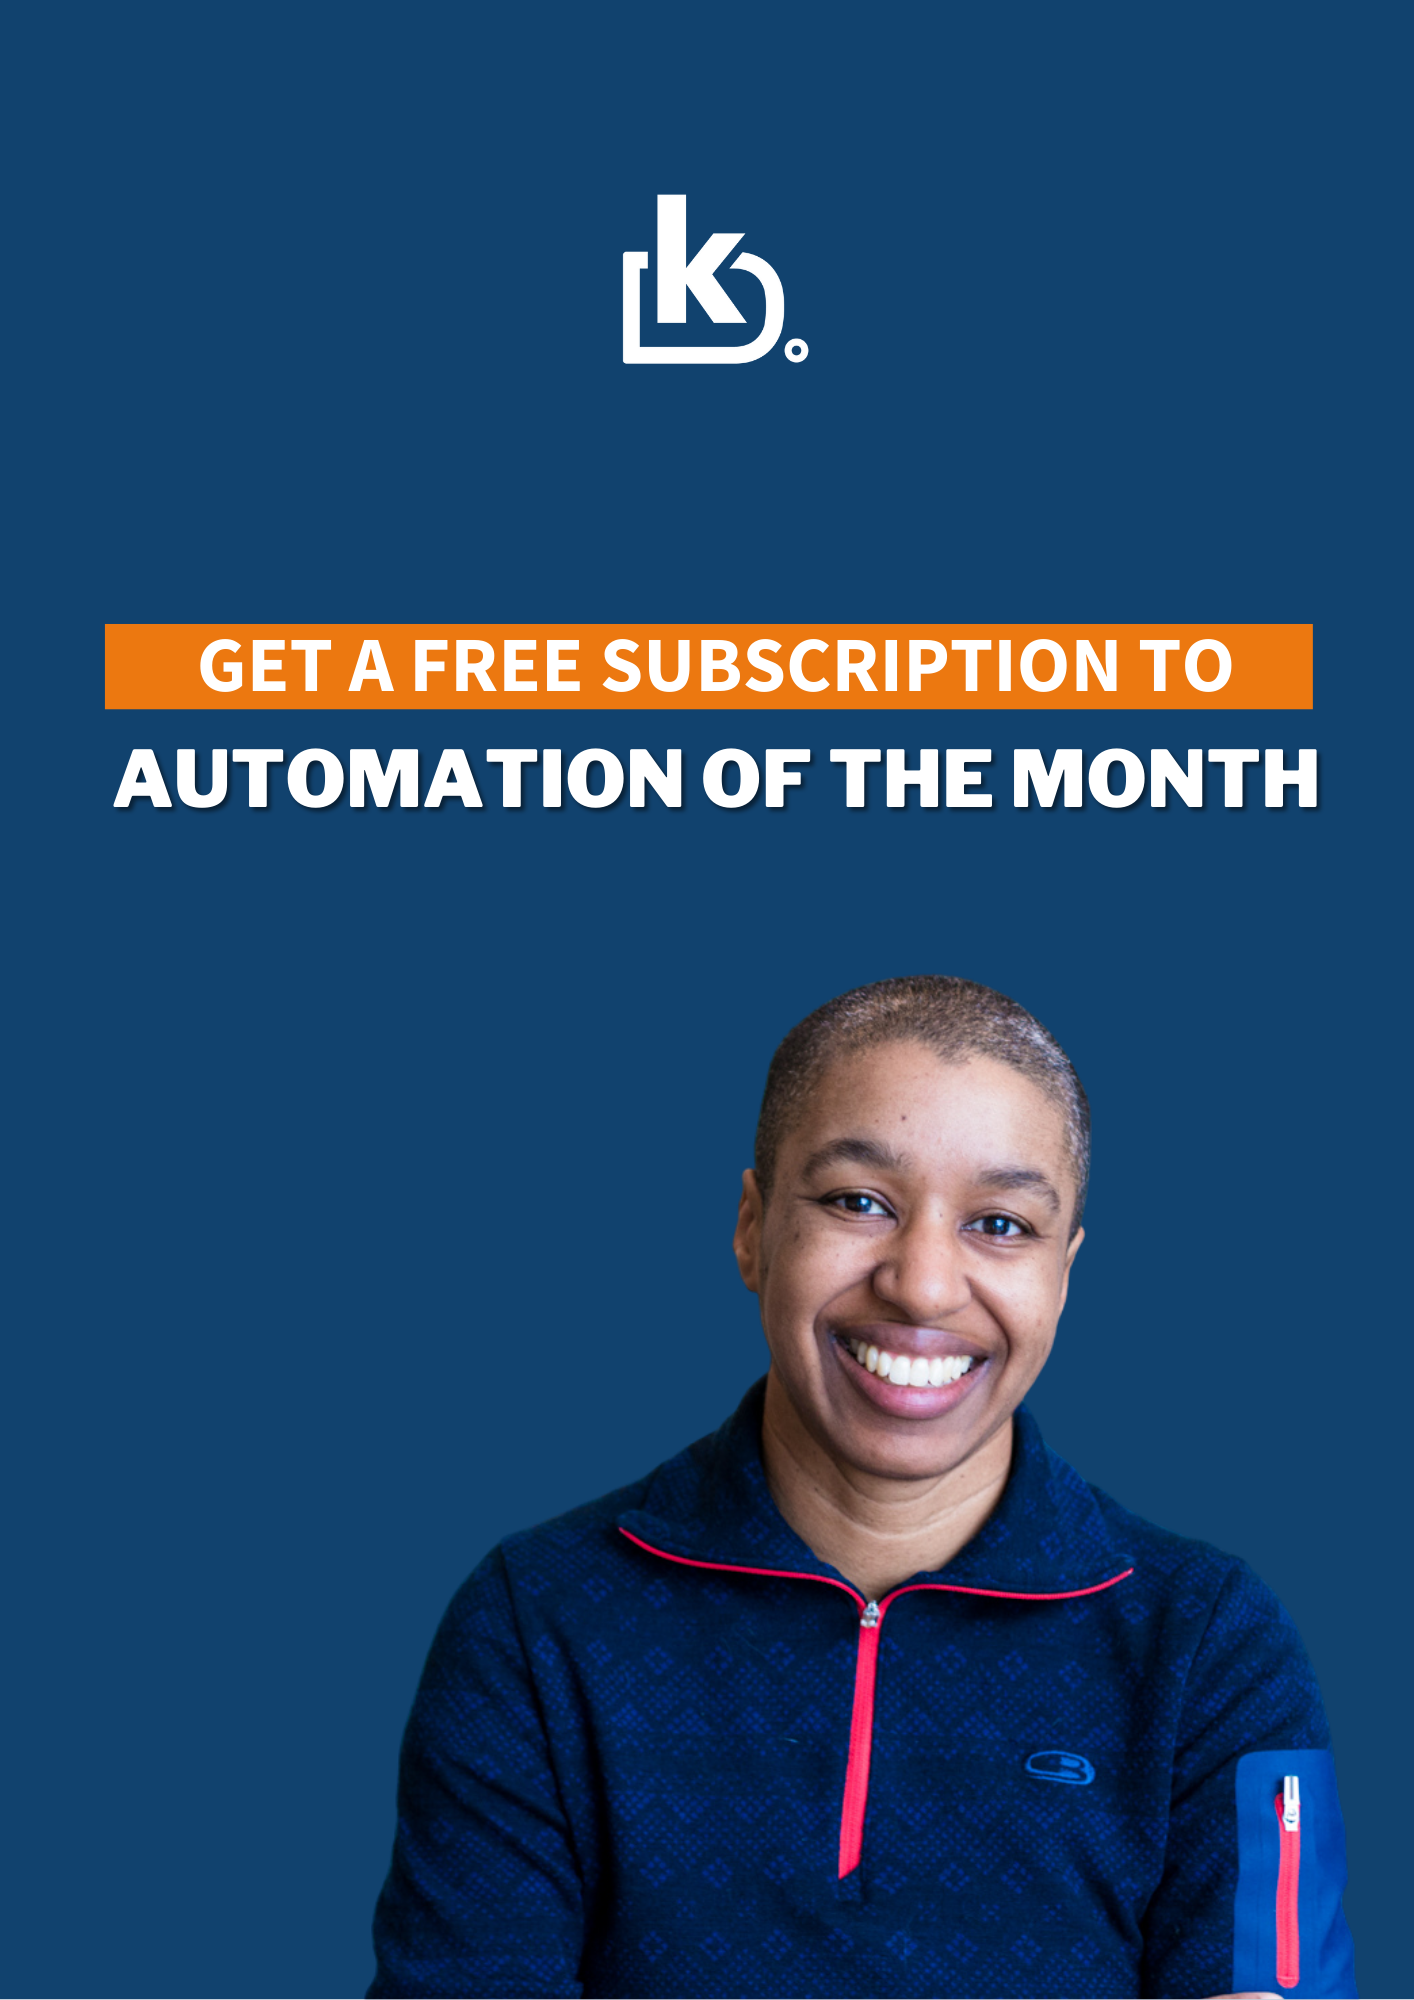 Get Automation of the month.